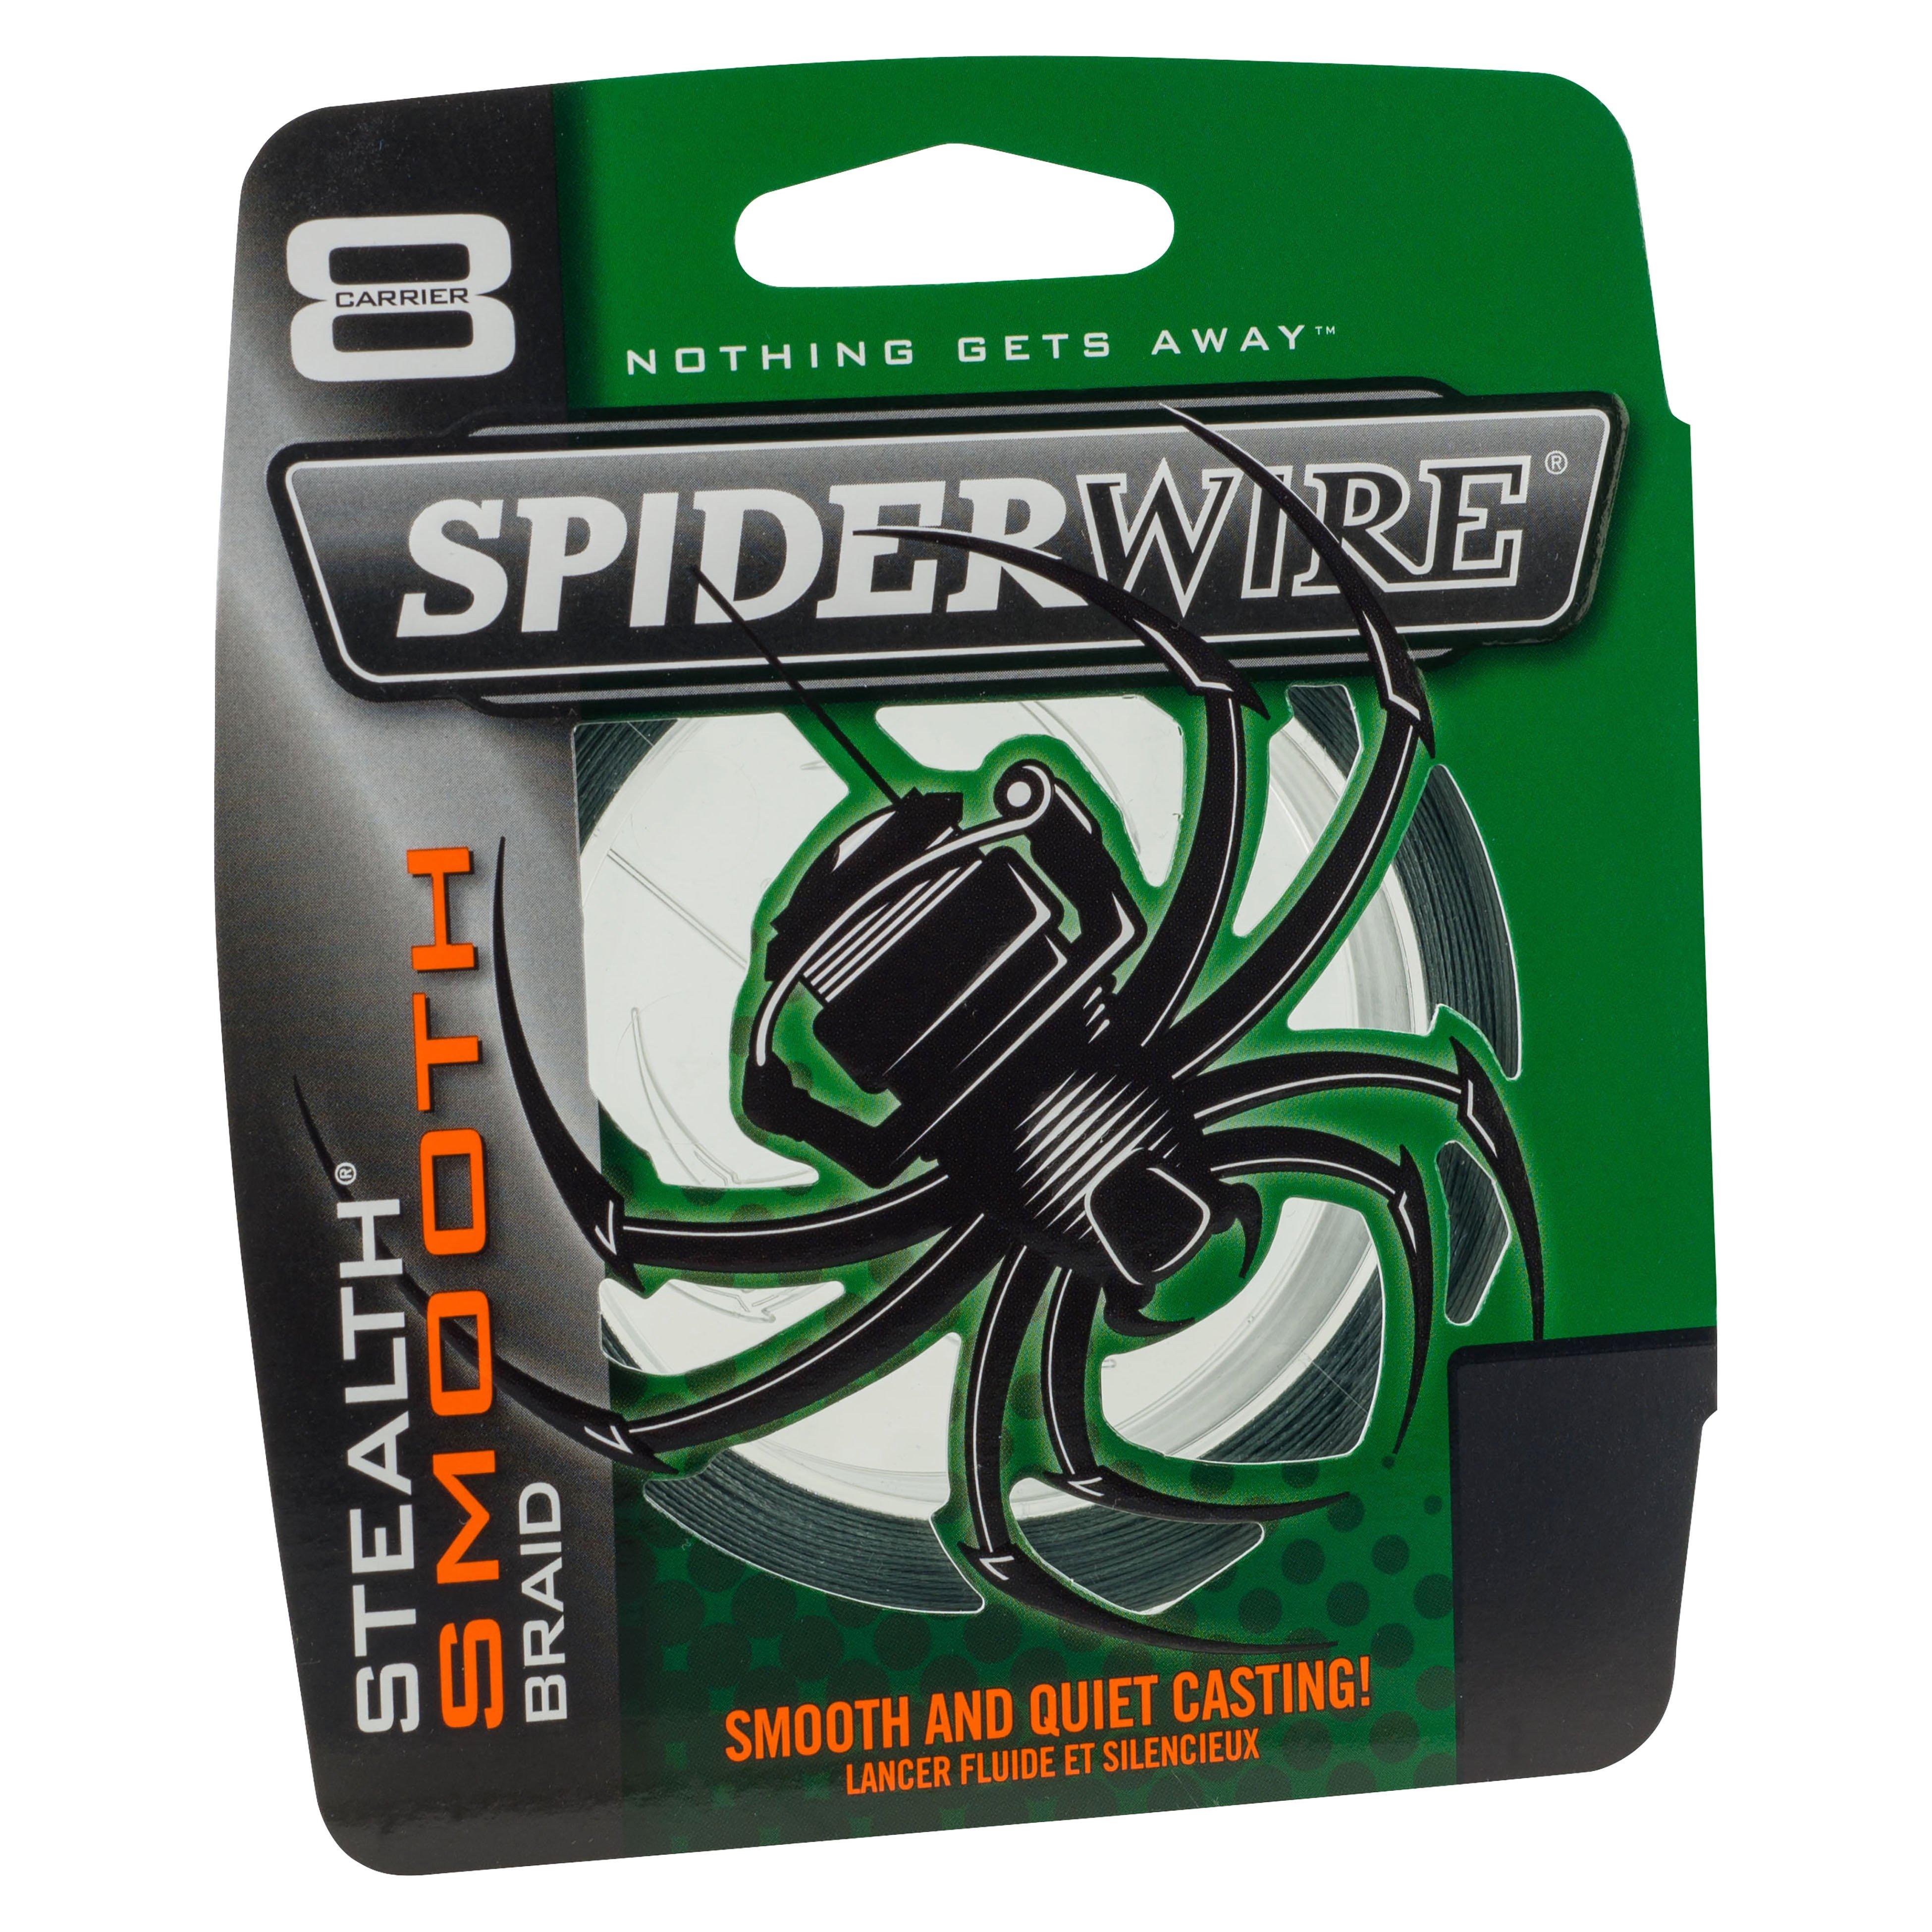 Spiderwire Stealth-braid 65lb in Moss Green Color 125yds for sale online